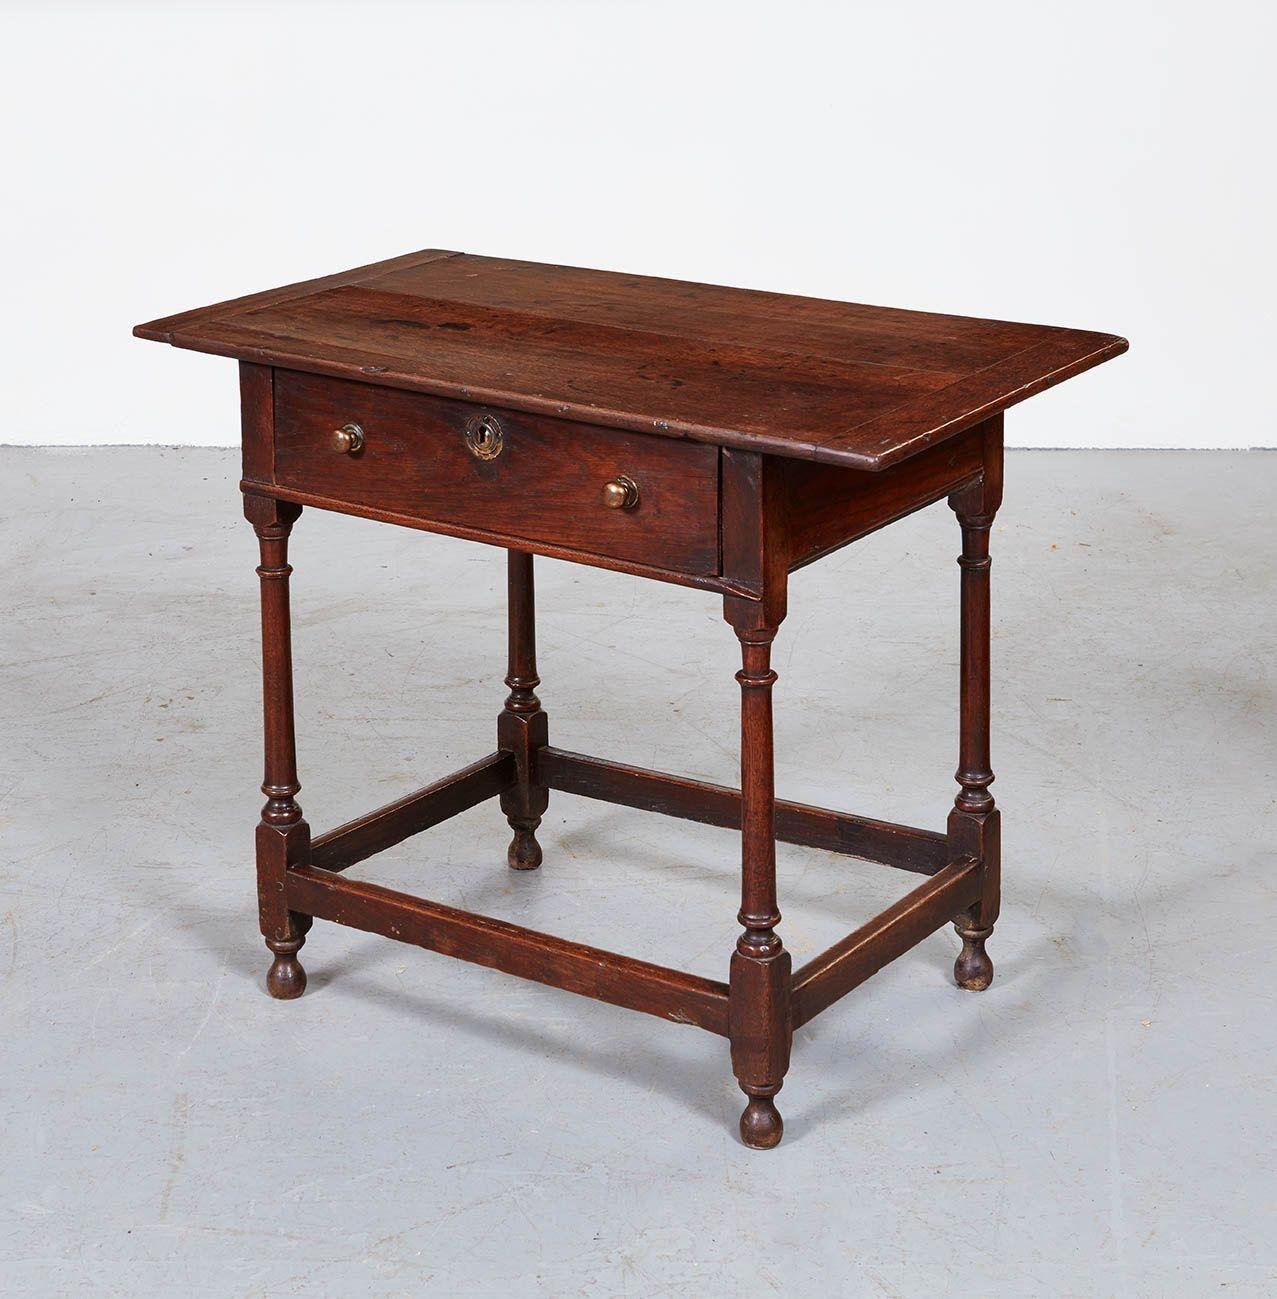 A very good oak side table having overhanging two-plank top with wide cleated ends over single drawer with central escutcheon and a pair of turned wood knobs over tapered and ring-turned legs on knob feet joined by molded box stretcher. Nice